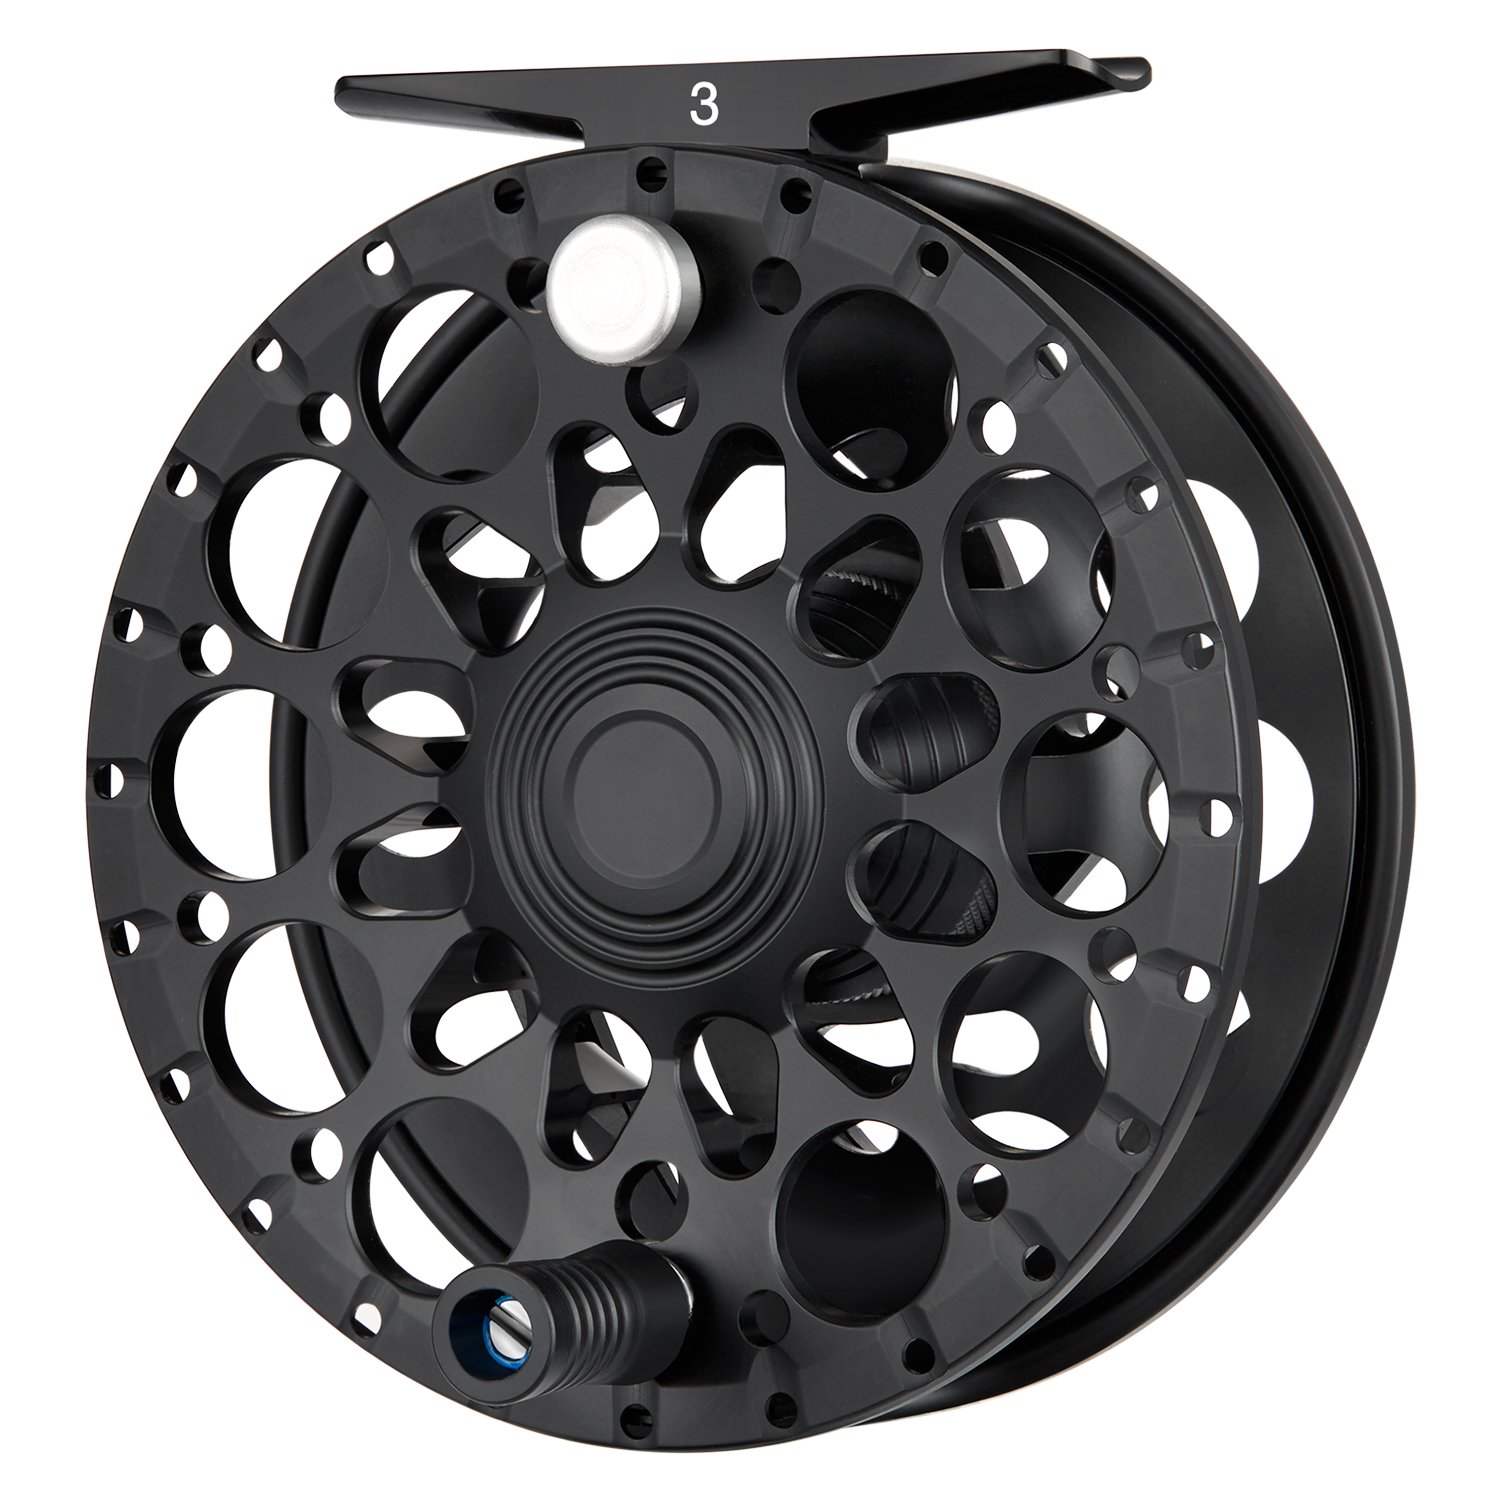 ECHO Bravo 10/12 Large Arbor Disc Drag Fly Reel in Black for a 10